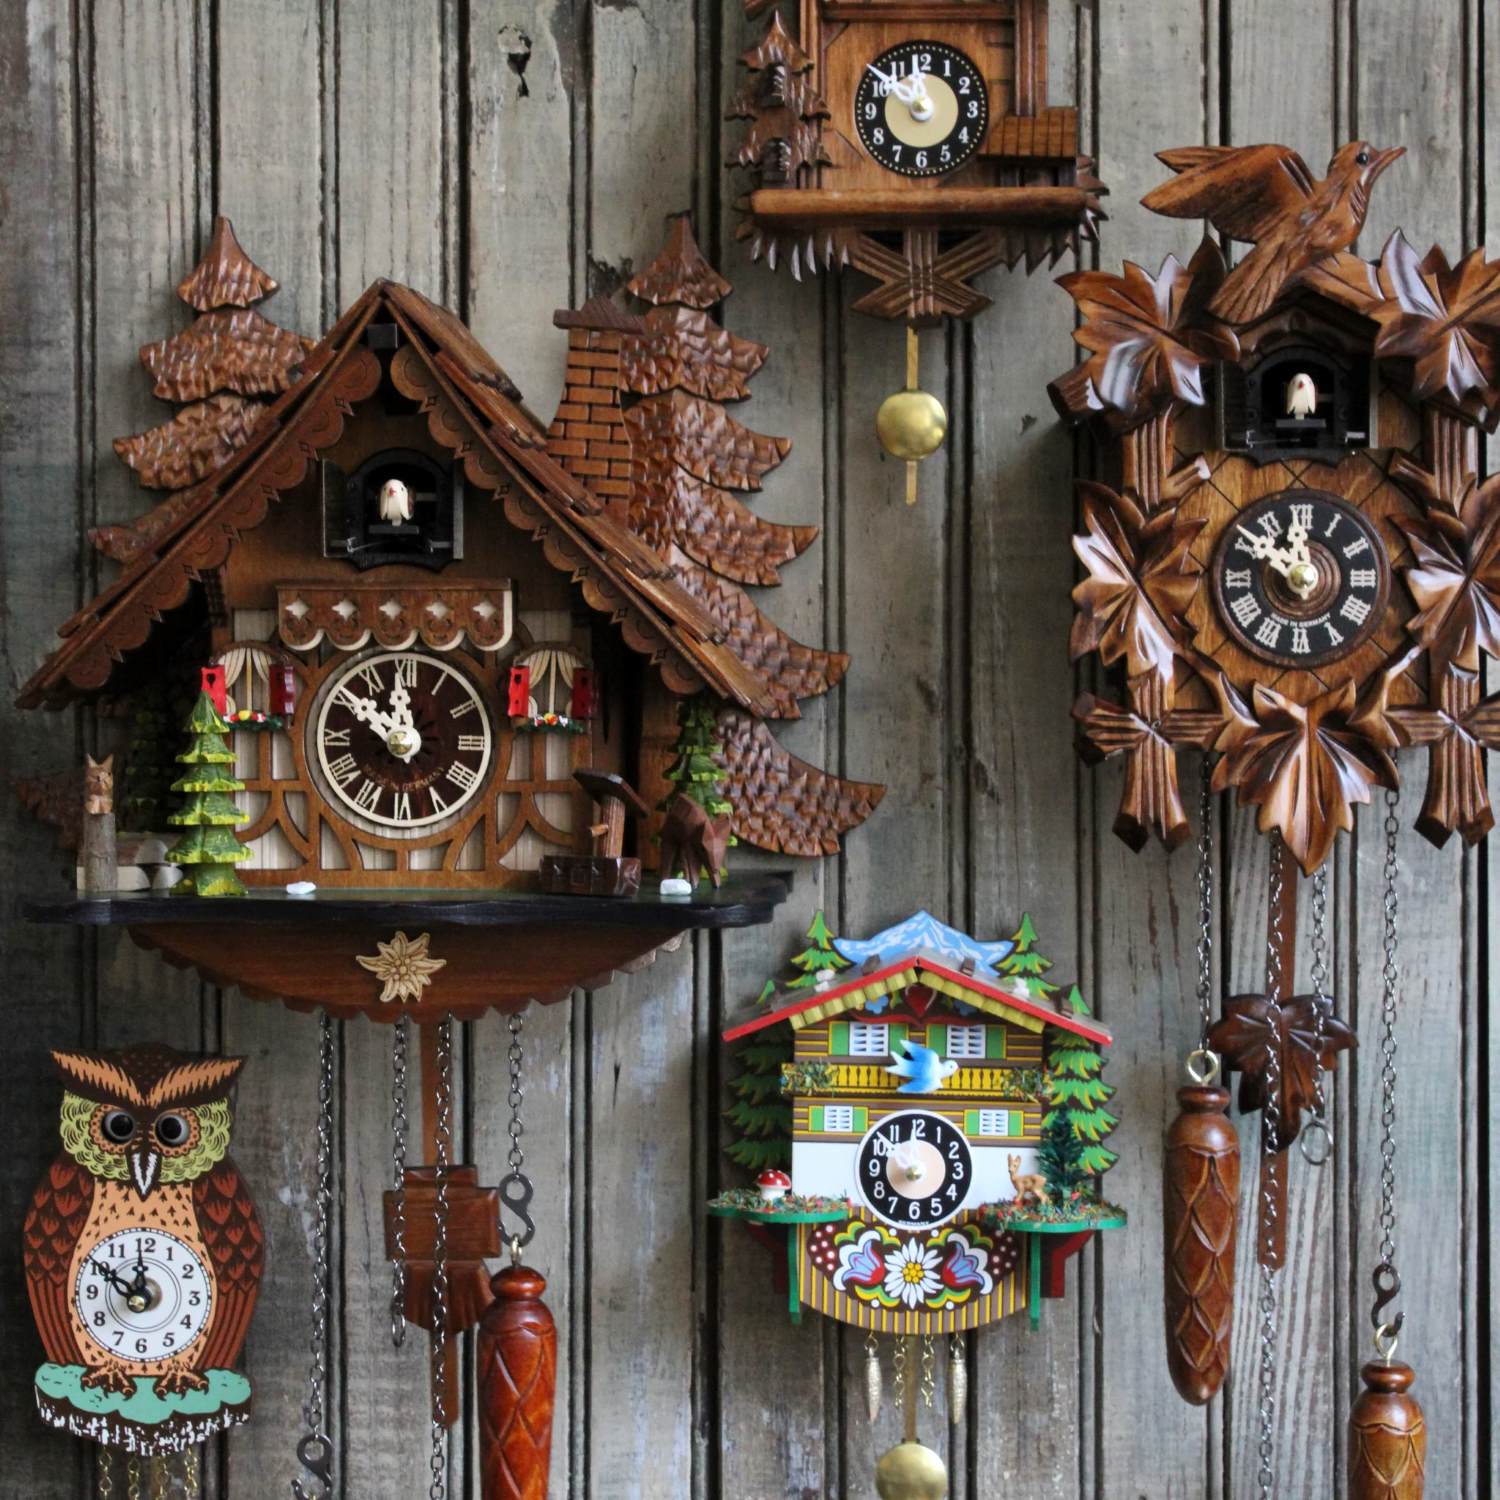 How To Set Up A Cuckoo Clock